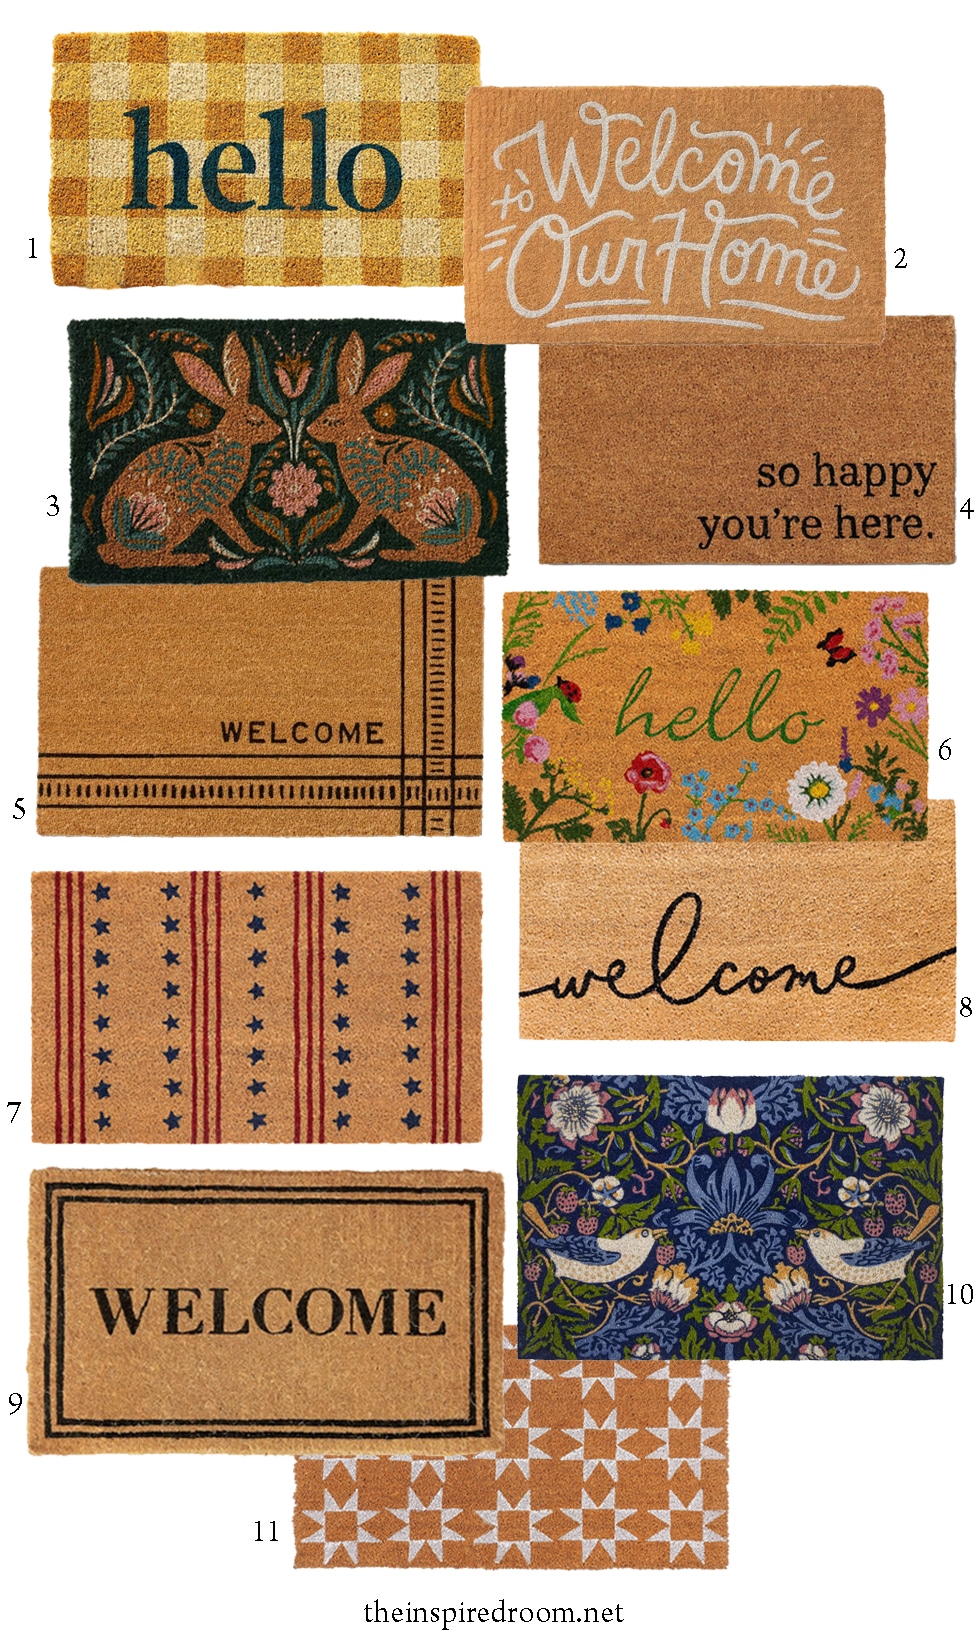 Summer Doormat Round Up (+ the Decor Accessory I Can't Stop Buying)